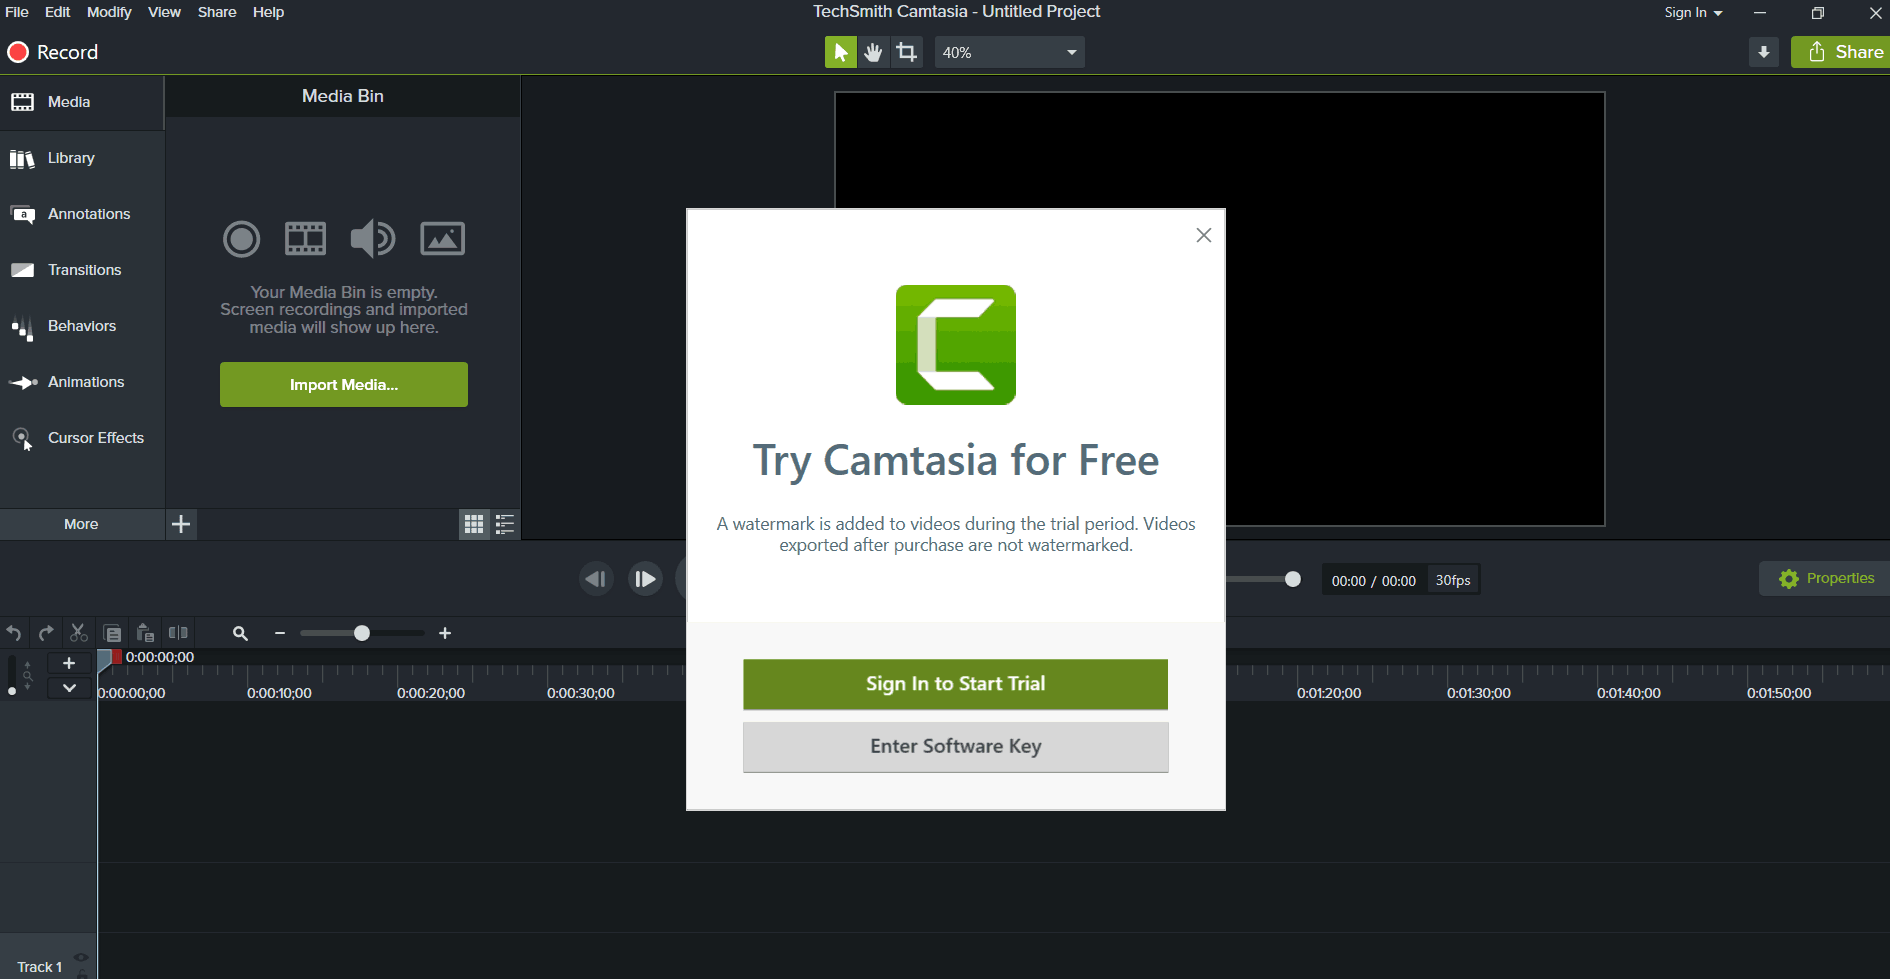 Sign in to Camtasia for free